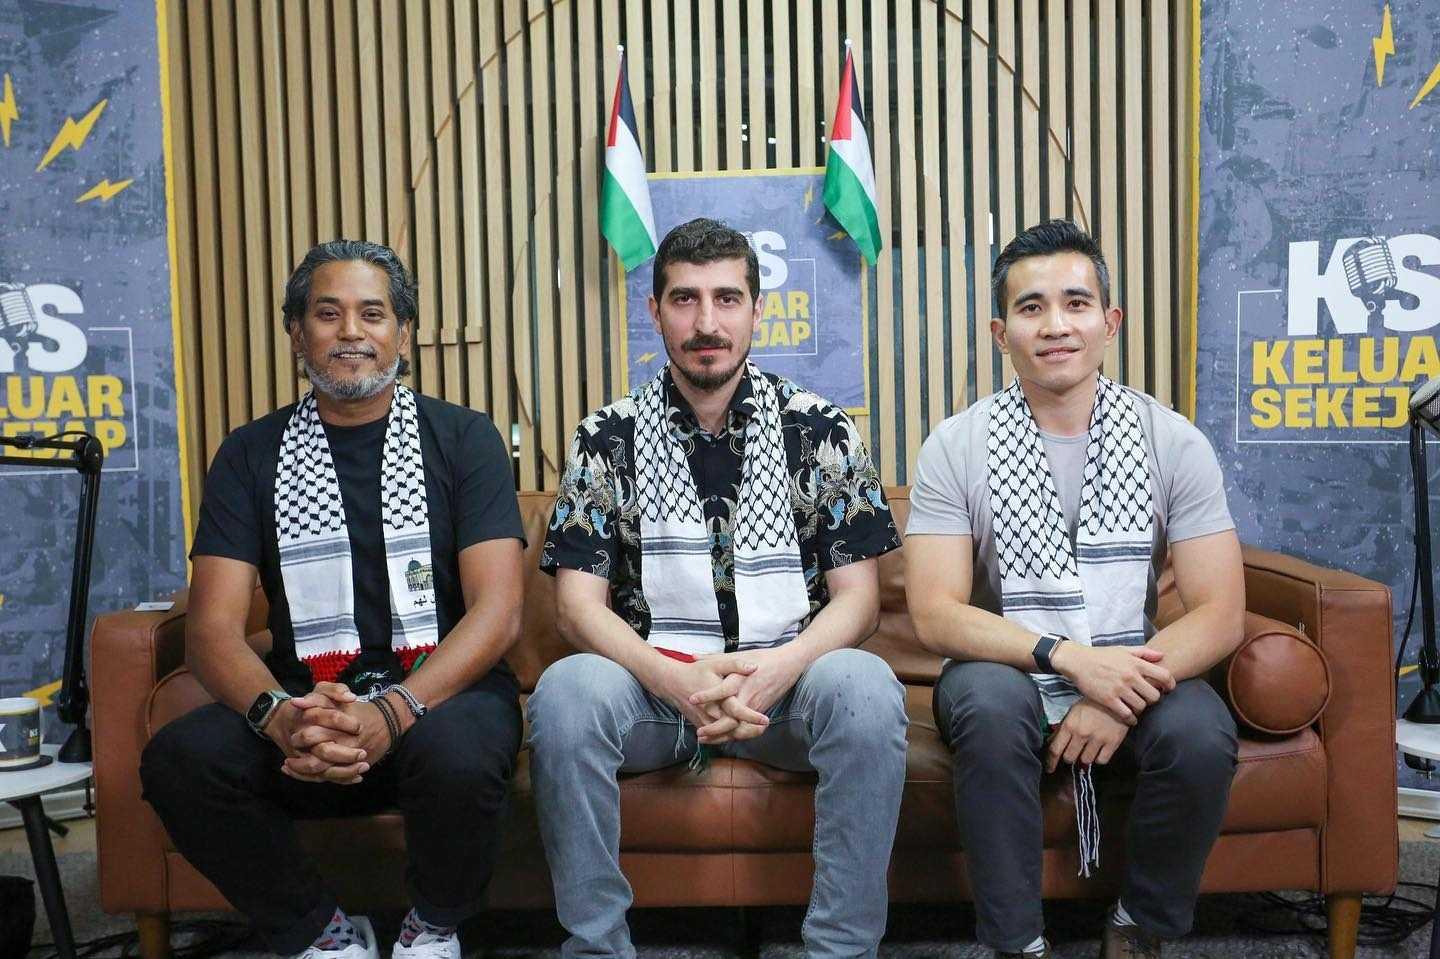 Palestinian scholar and activist Muslim Imran (centre) in a special edition of Keluar Sekejap, the podcast hosted by former Umno duo Khairy Jamaluddin and Shahril Hamdan.